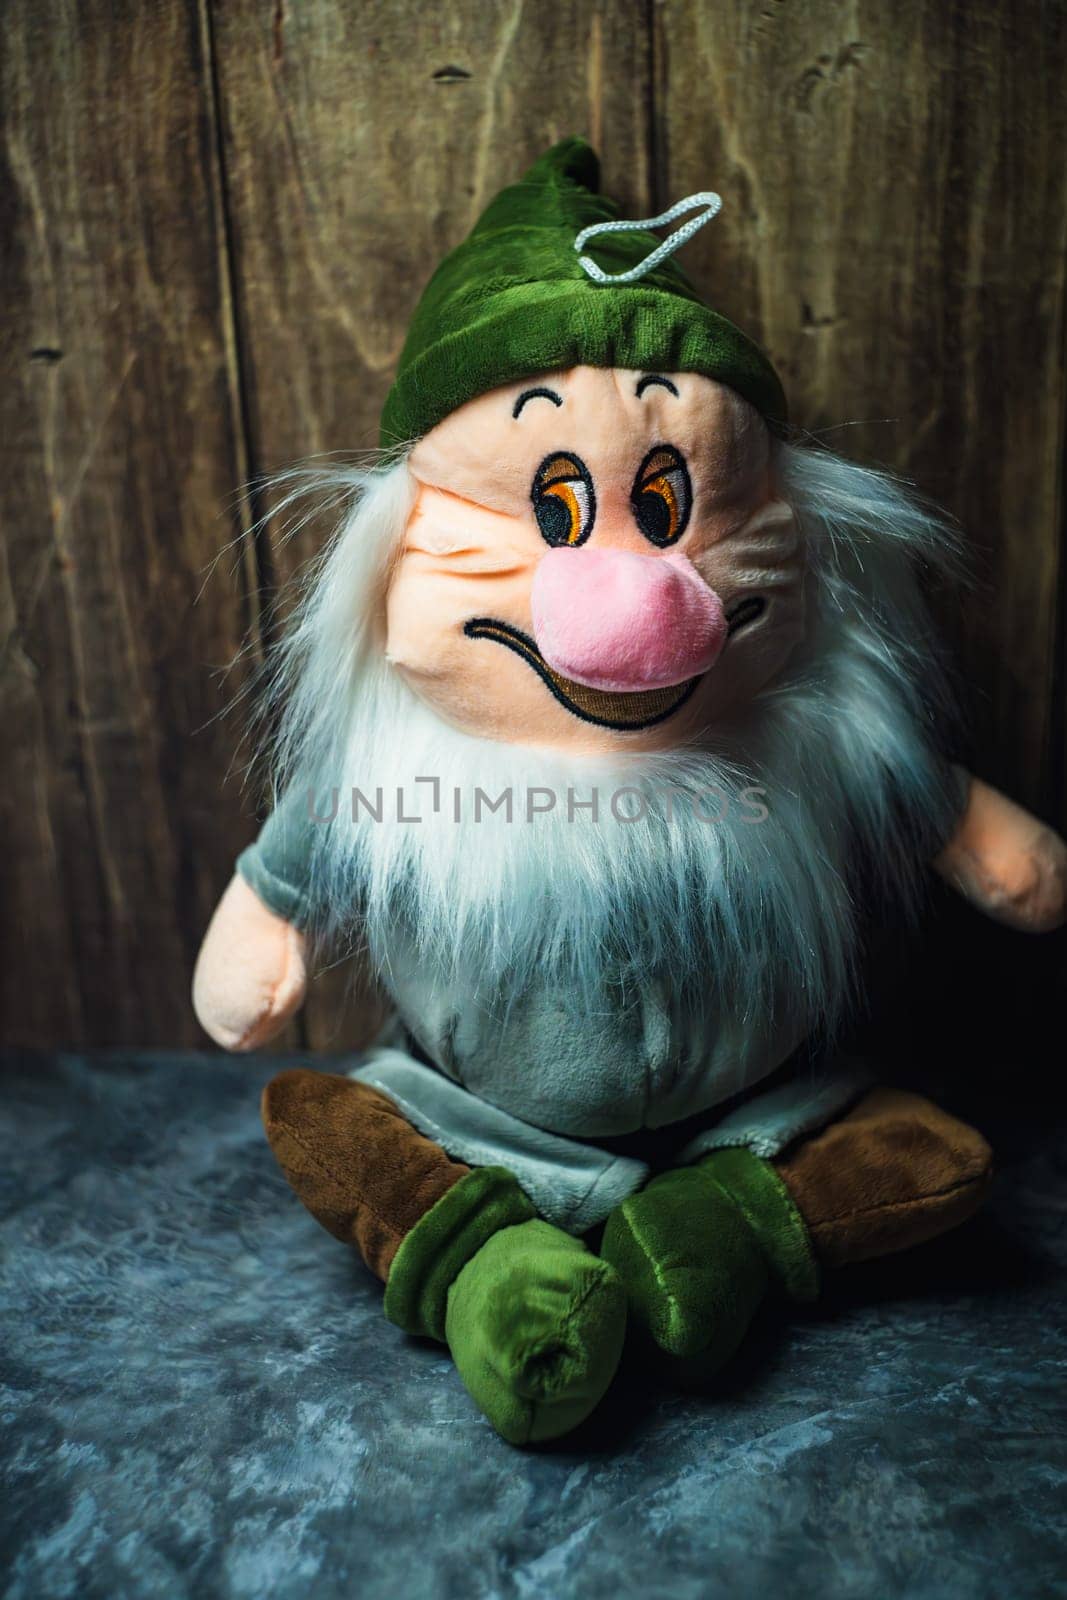 A toy gnome sits leaning on a wooden wall. High quality photo